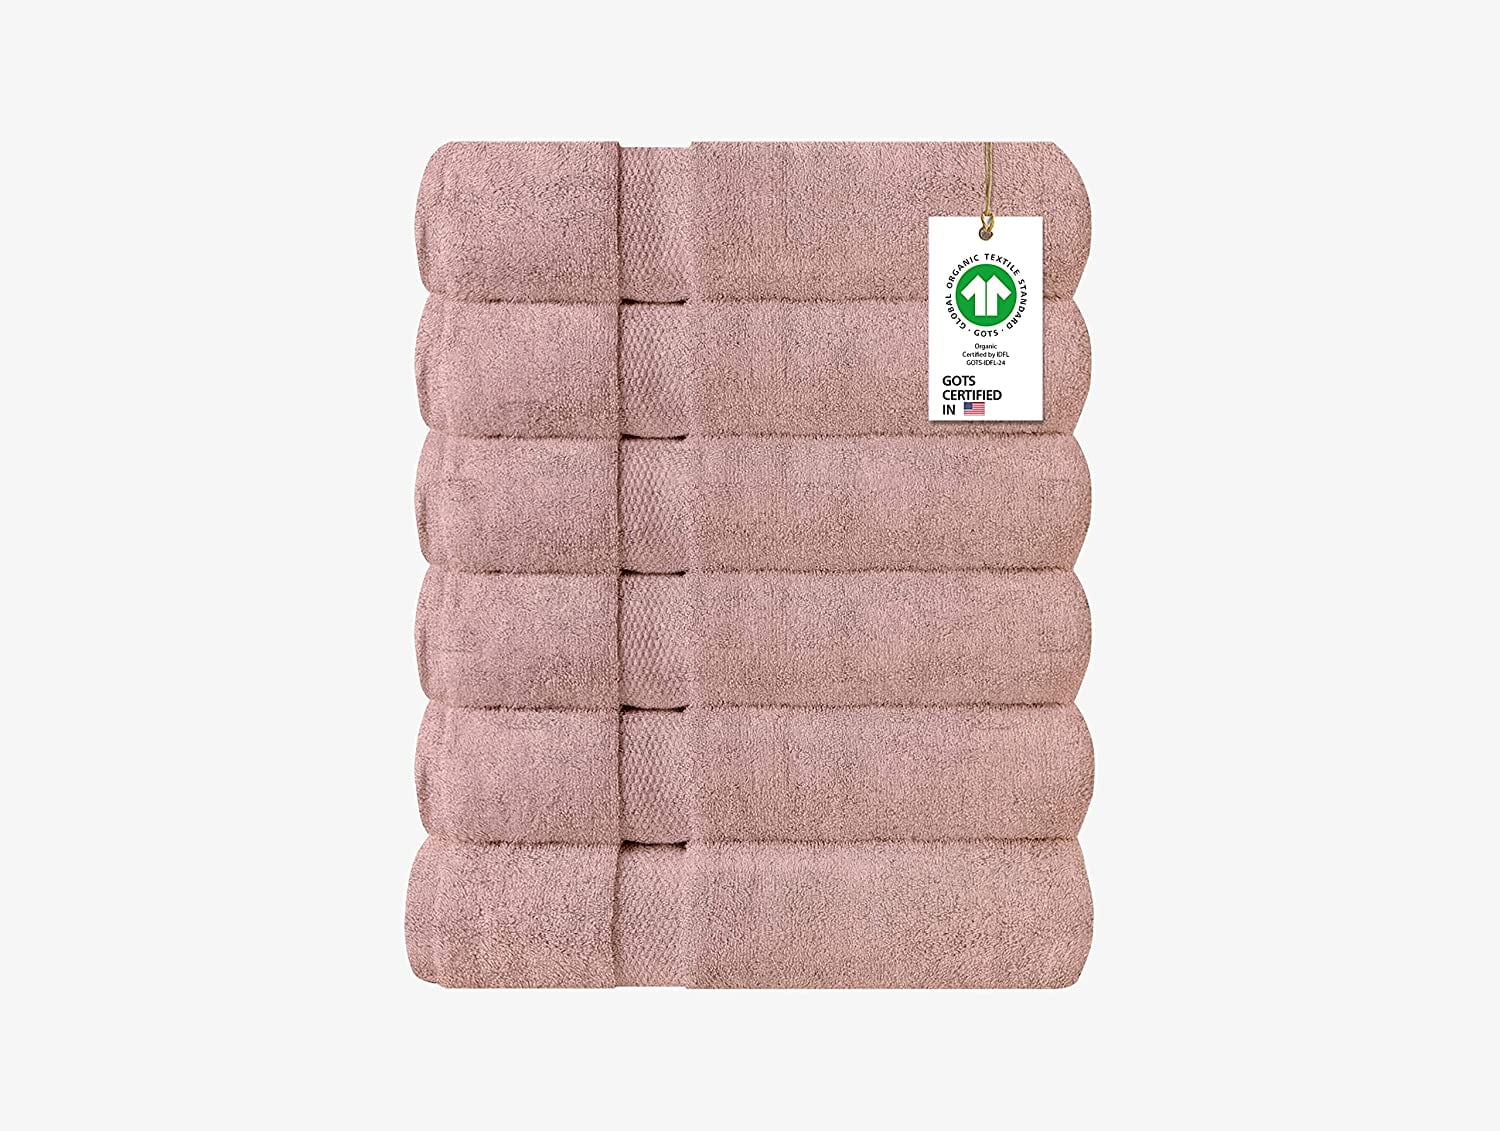 Feather & Stitch 6 Piece Sets of Bathroom Towels - 100% Cotton High Quality  - 650 GSM Hotel Collection Bath Towel Set - 2 Bath Towels, 2 Hand Towels 